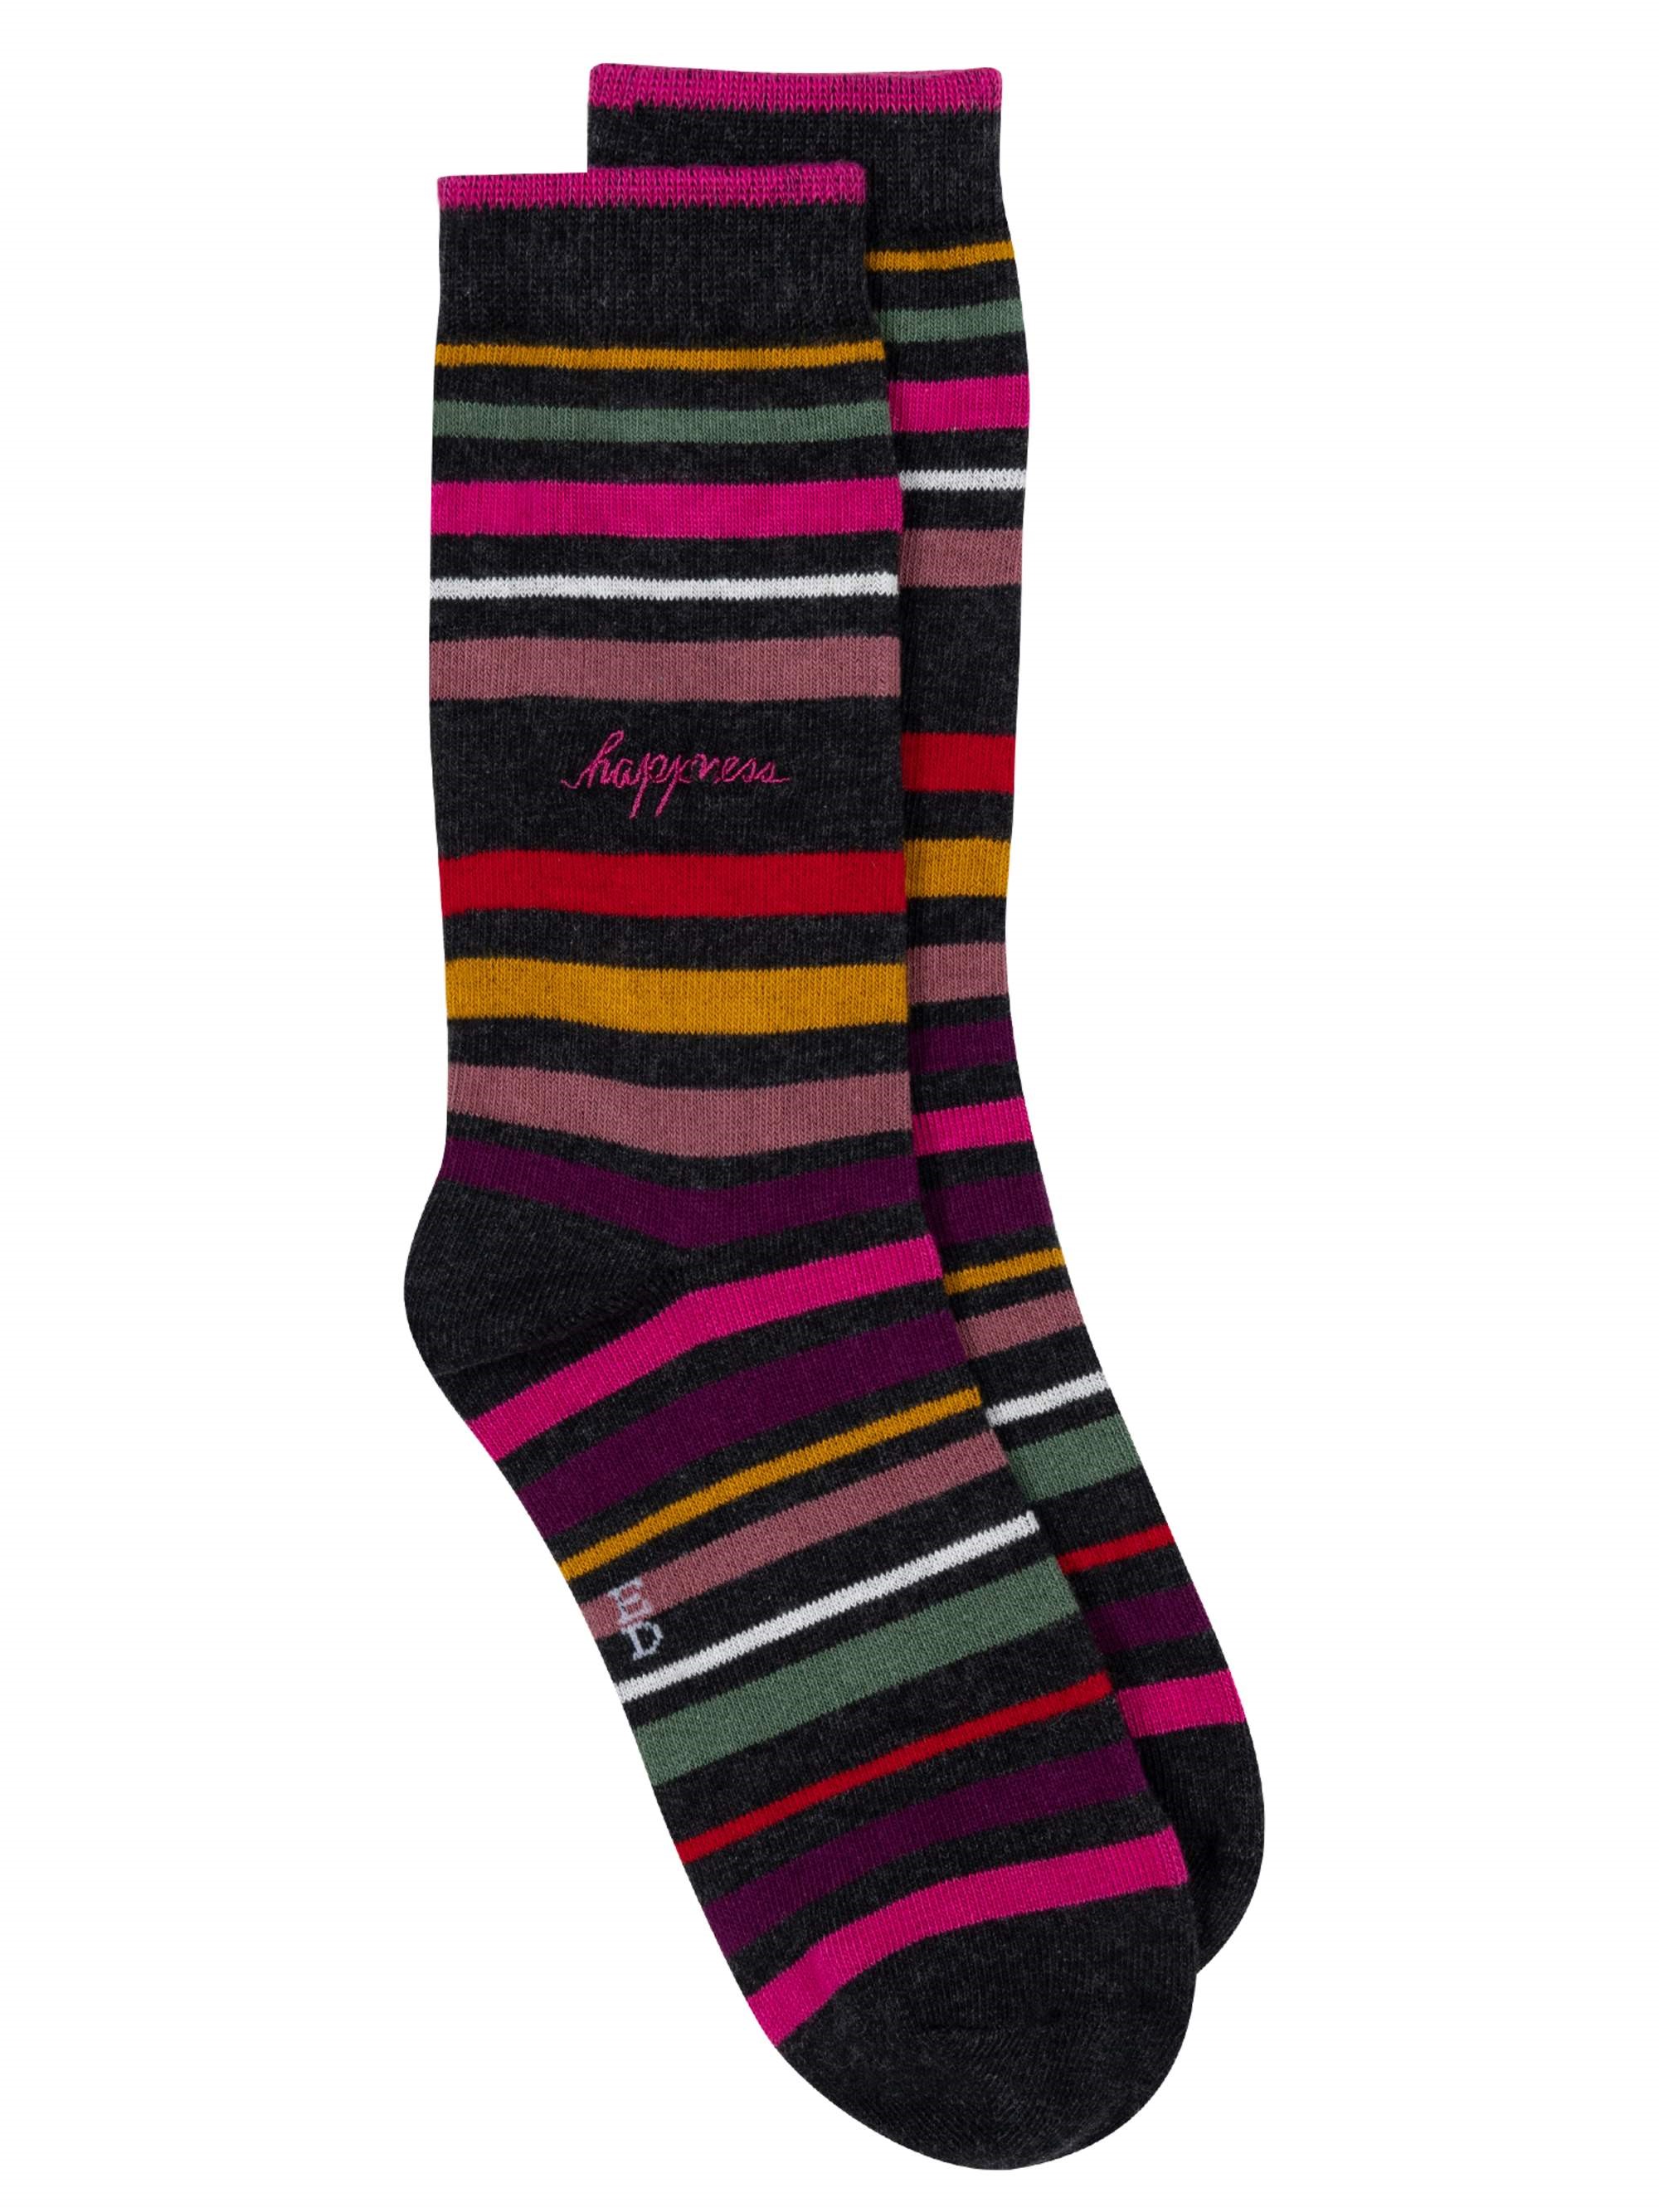 Women's Multi Stripe Happiness Embroidered Crew Socks - image 1 of 1